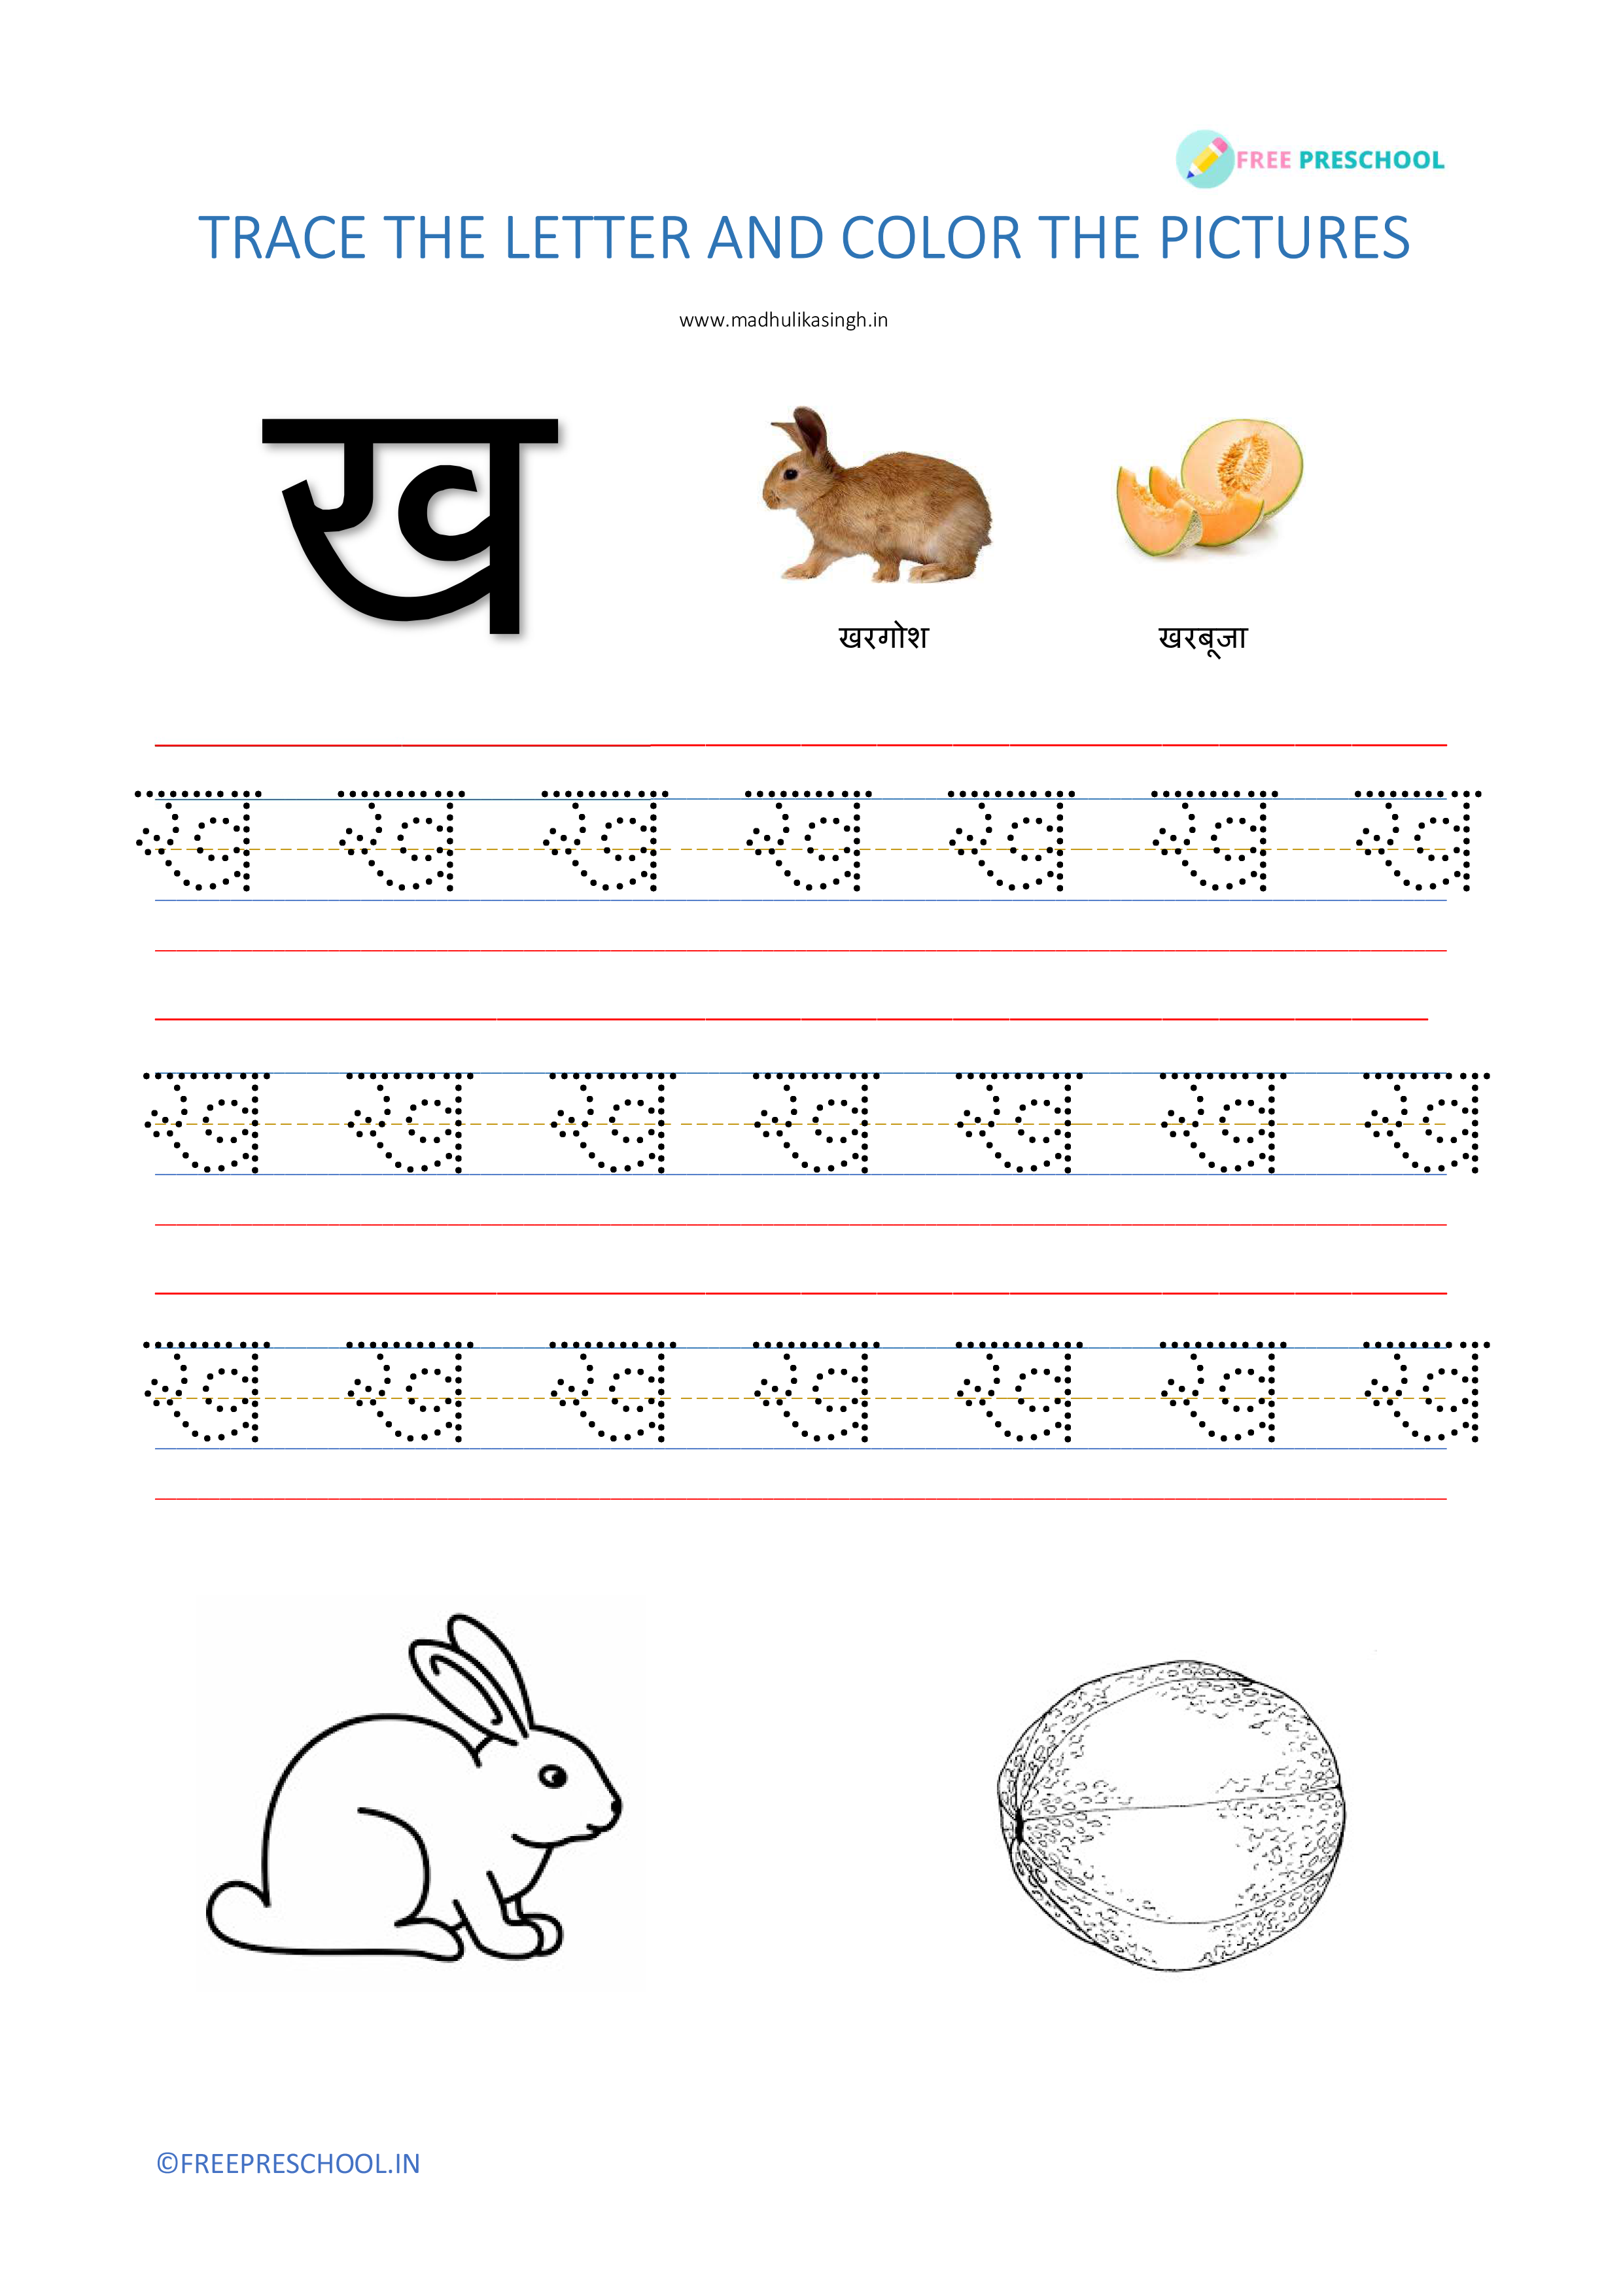 hindi-alphabet-tracing-worksheets-printable-pdf-to-56-pages-d35